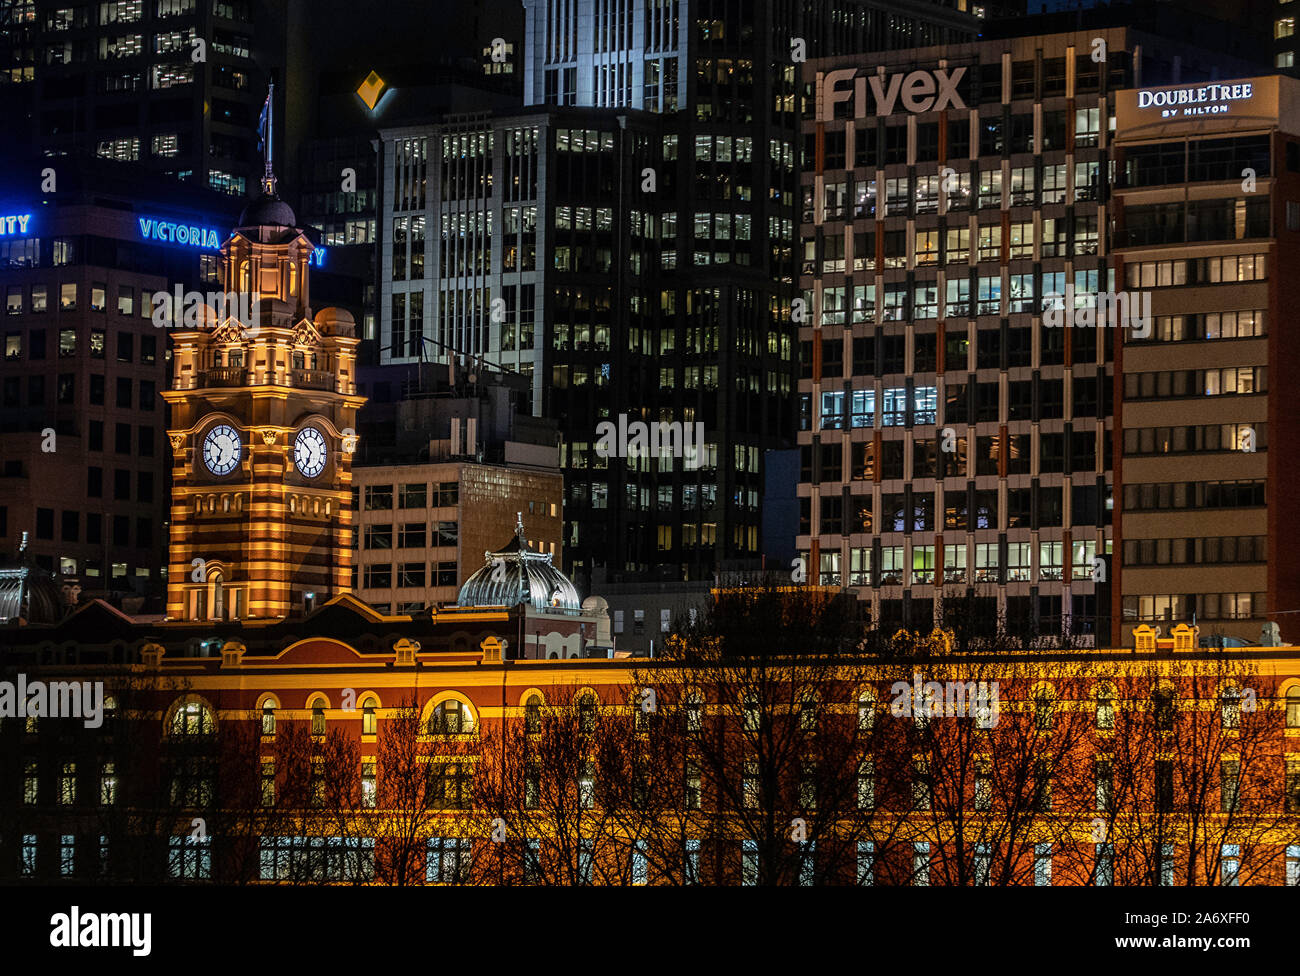 Melbourne Australia: The historic Flinders Street railway station in the heart of the city is a cultural icon of Melbourne. Stock Photo